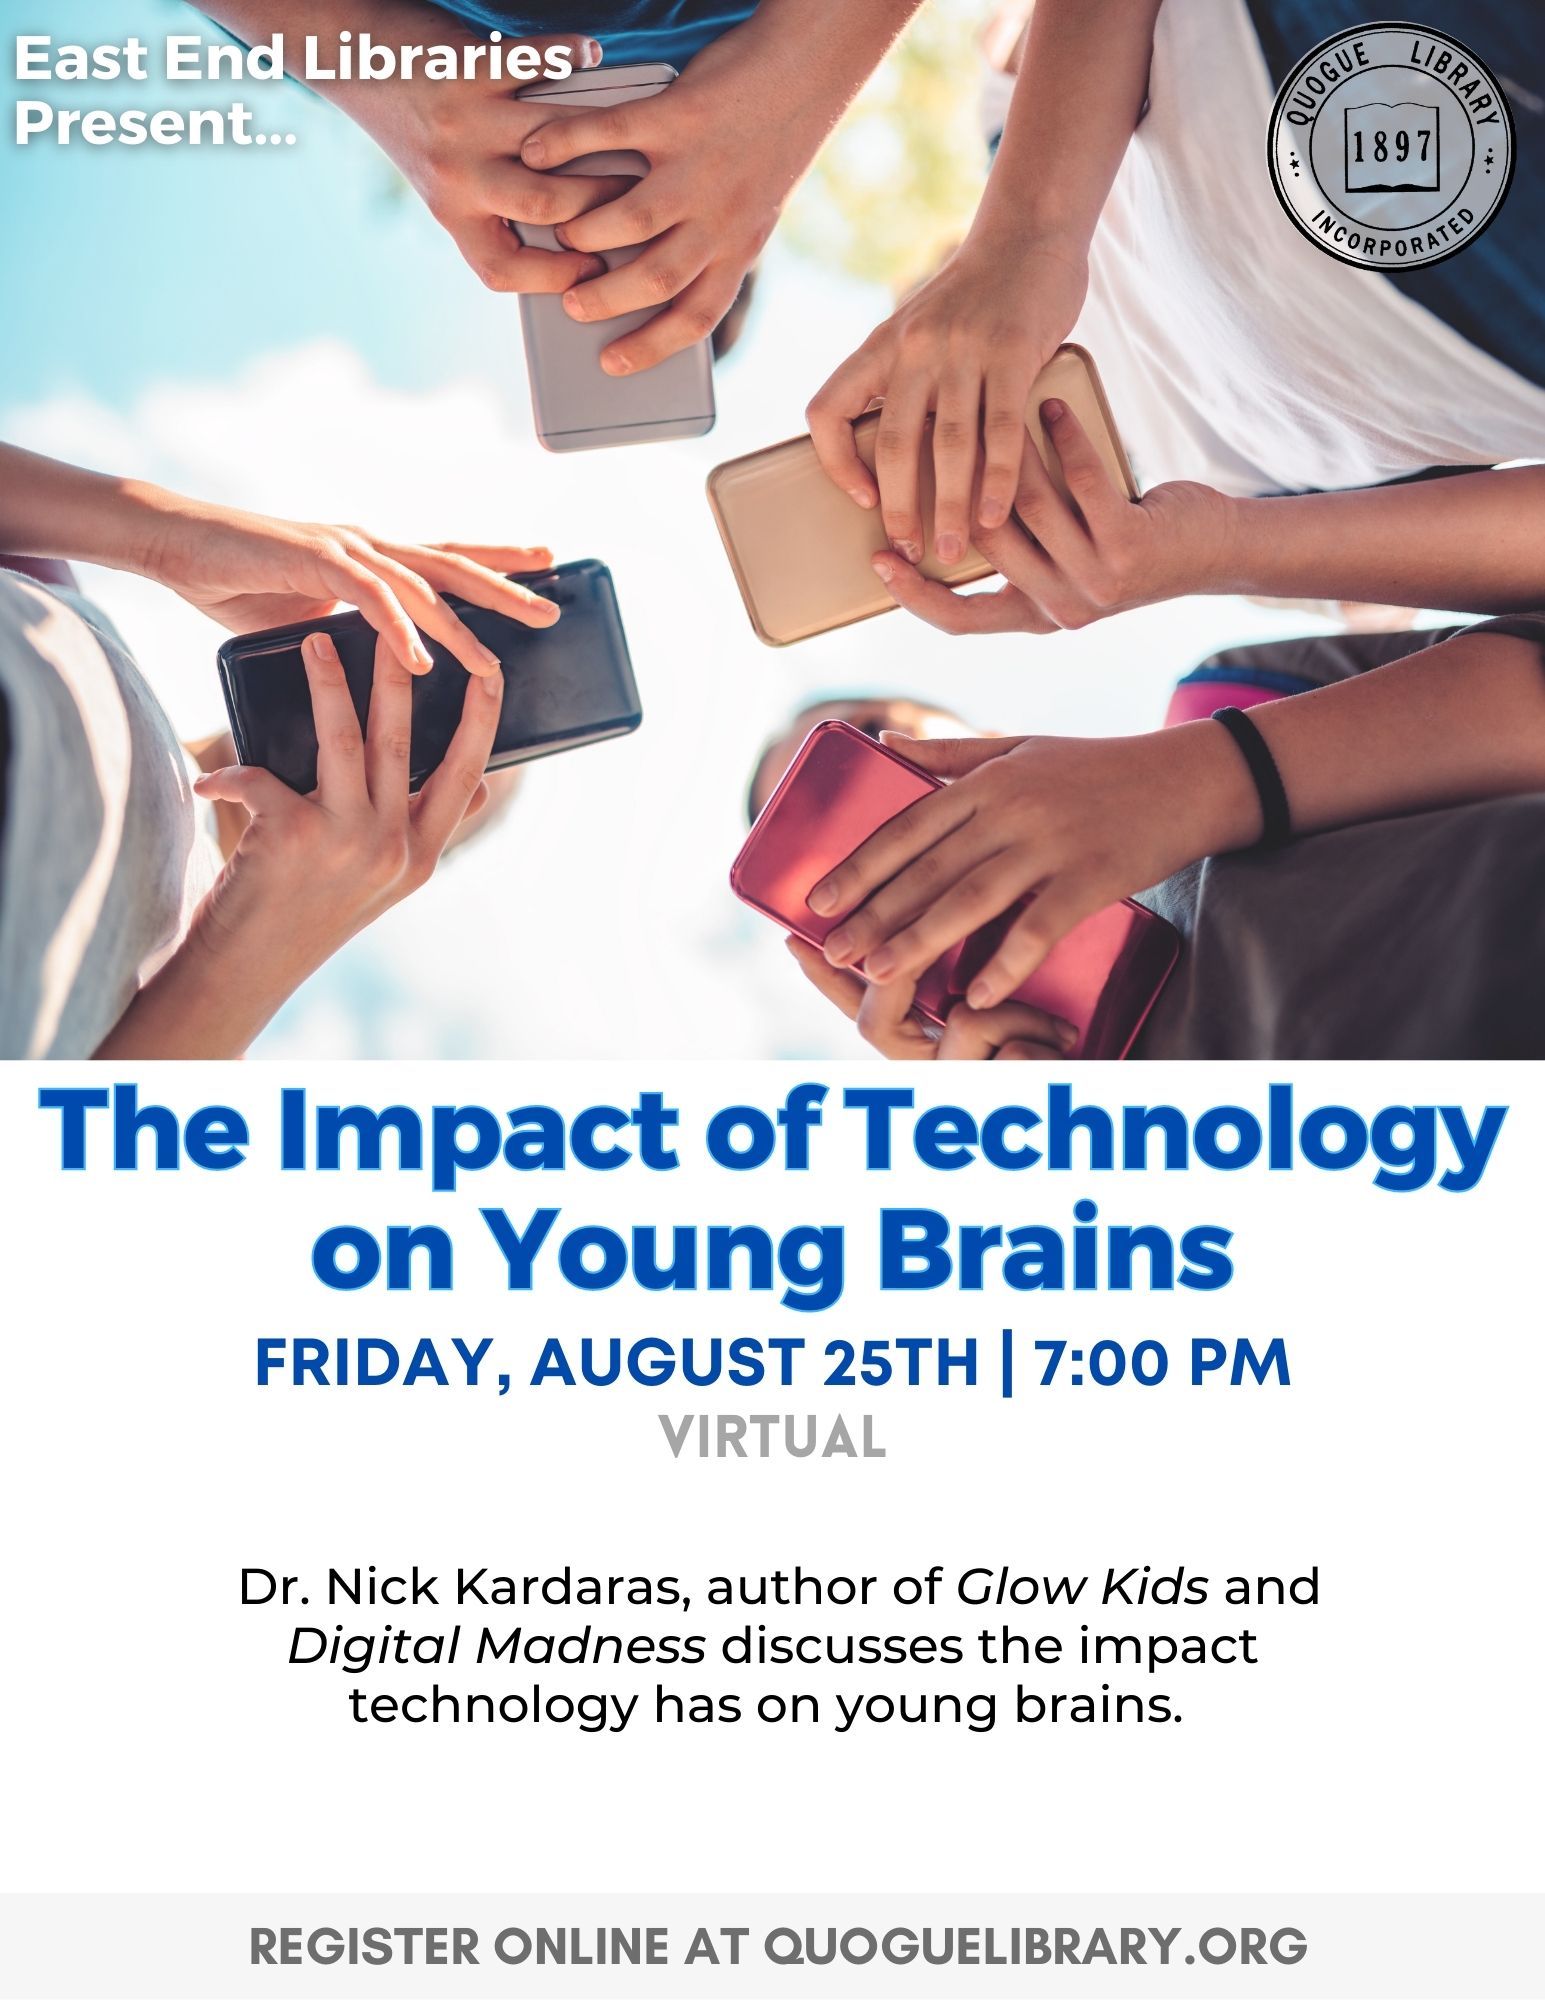 The Impact of Technology on Young Brains